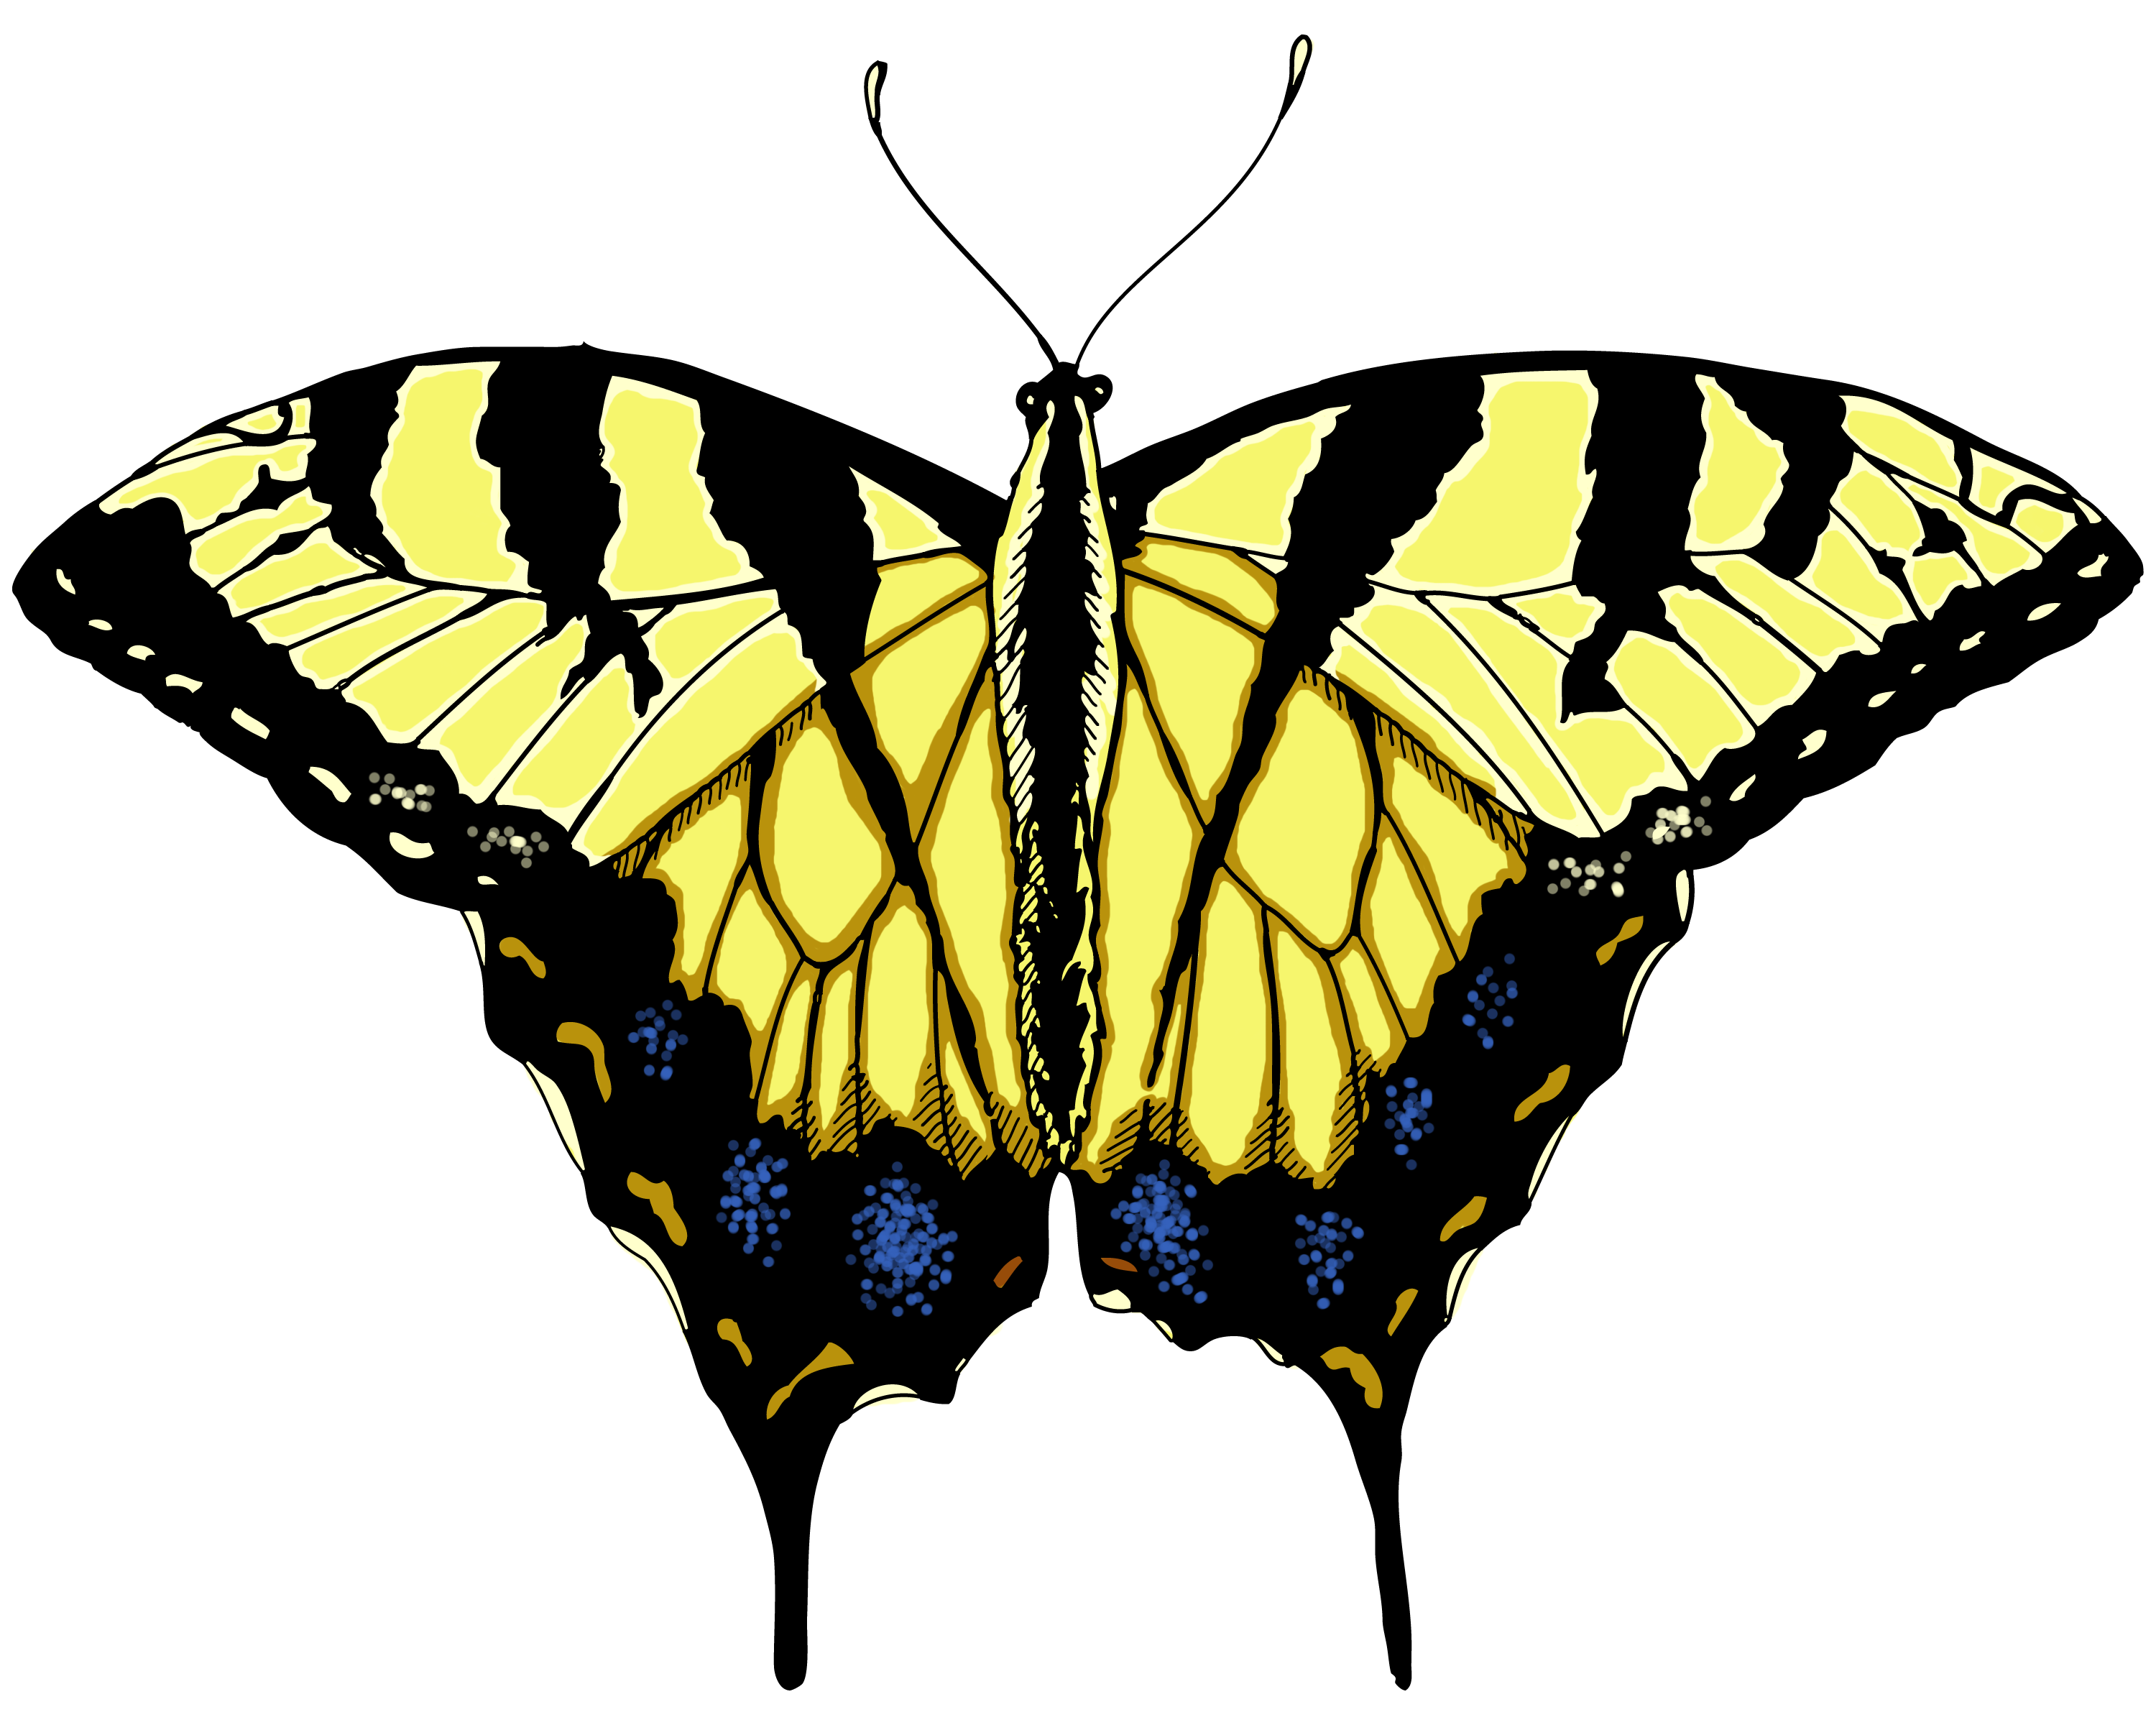 Butterfly Illustrations - ClipArt Best